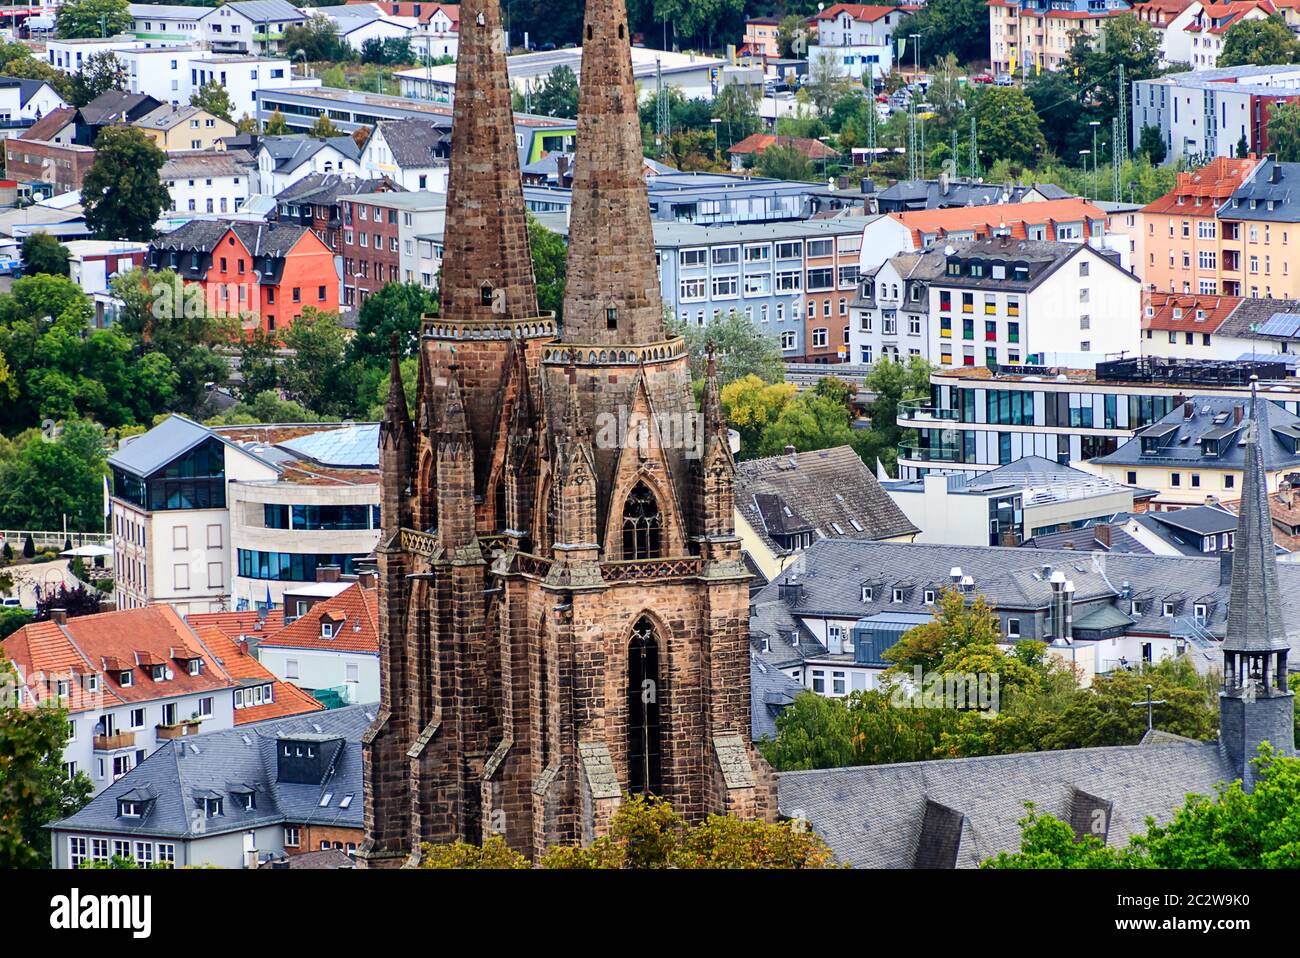 Panoramic view of university town Marburg with the Church of St. Elisabeth, Germany Stock Photo